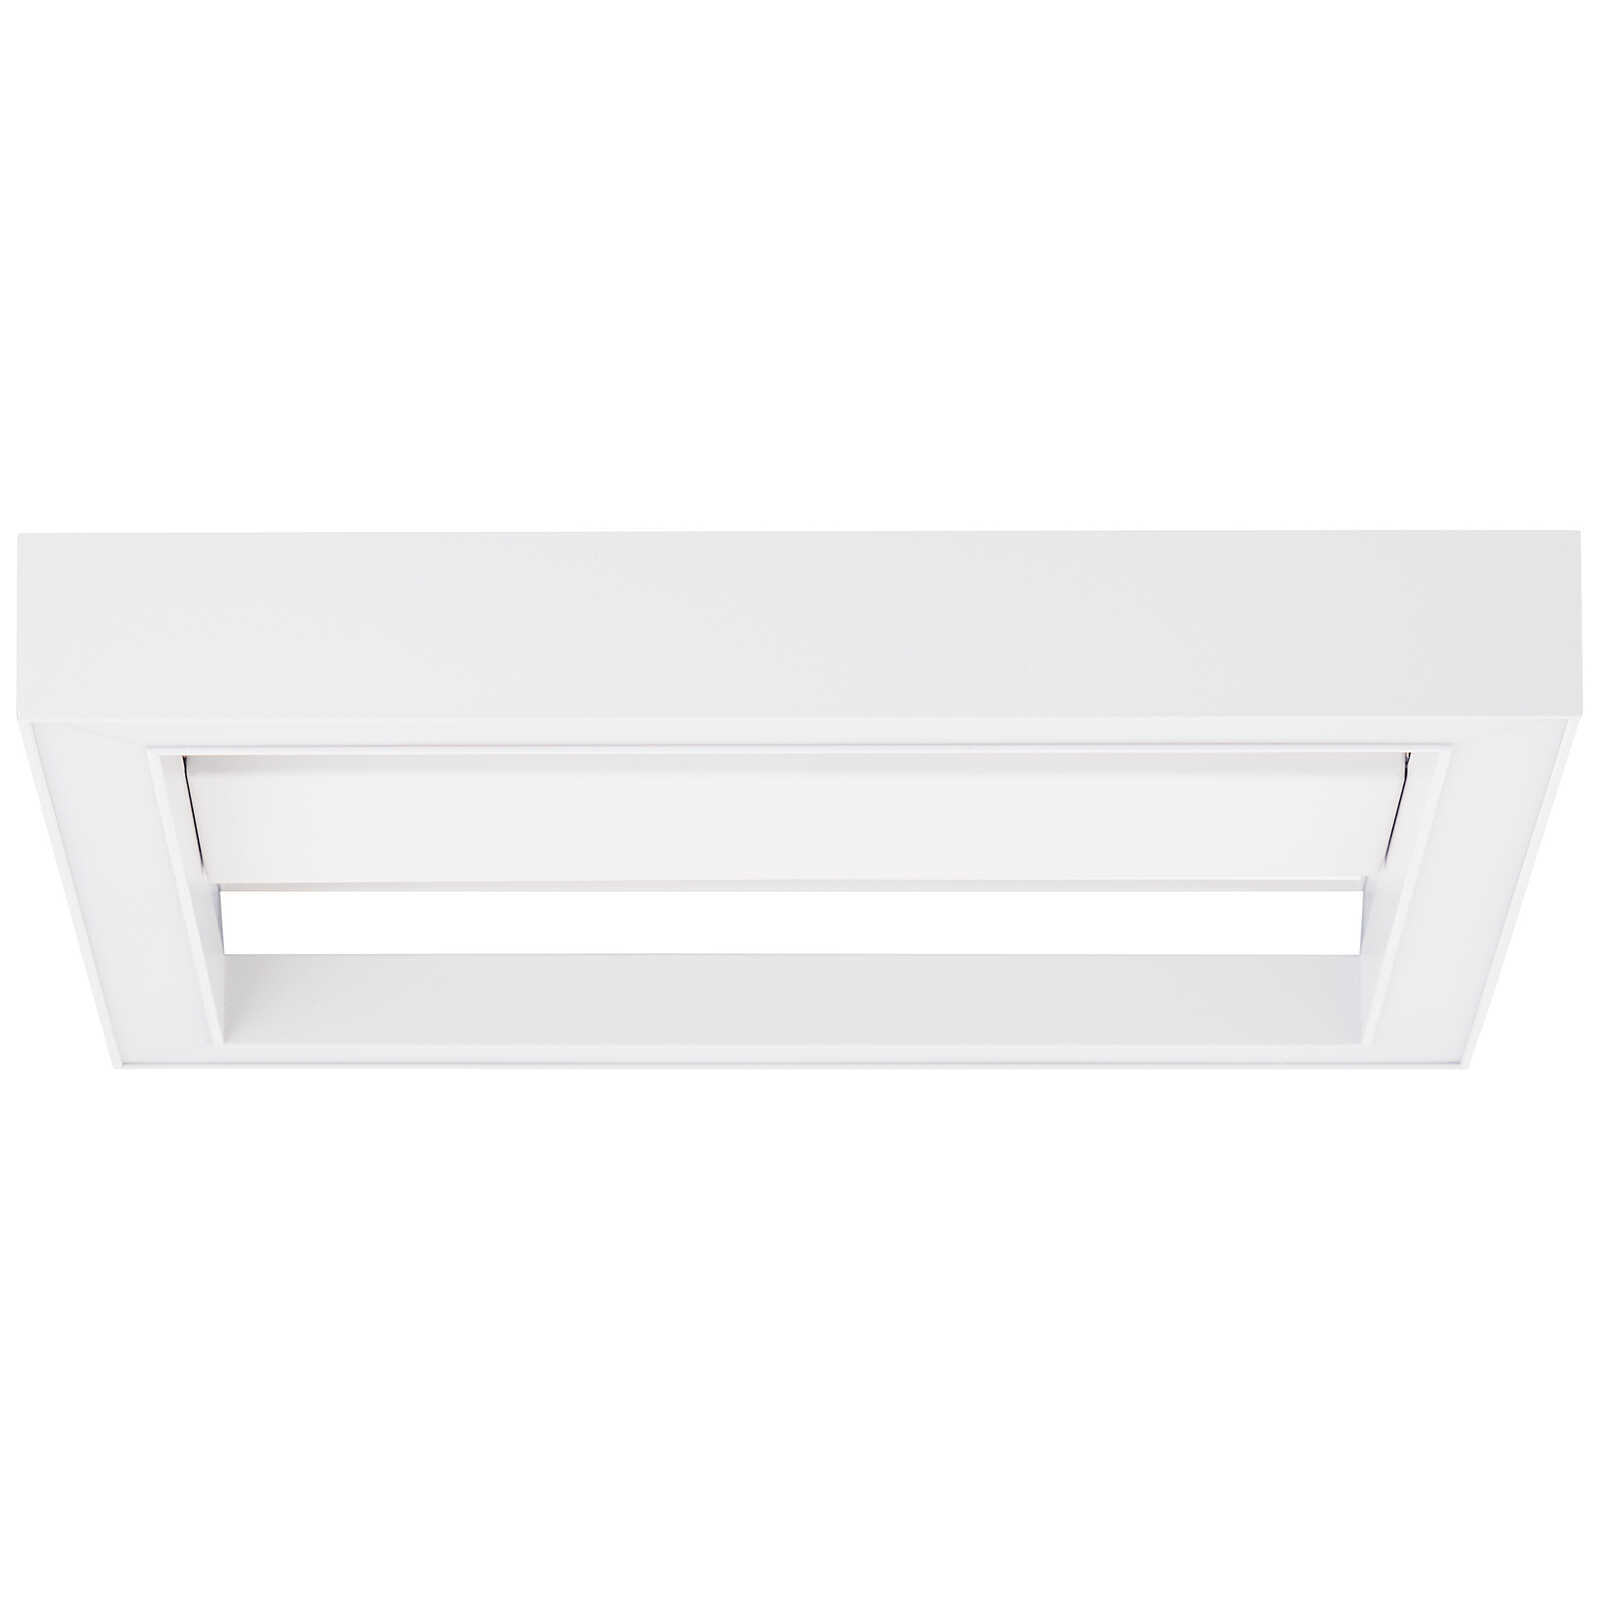             Plastic wall and ceiling light - Janis 1 - White
        